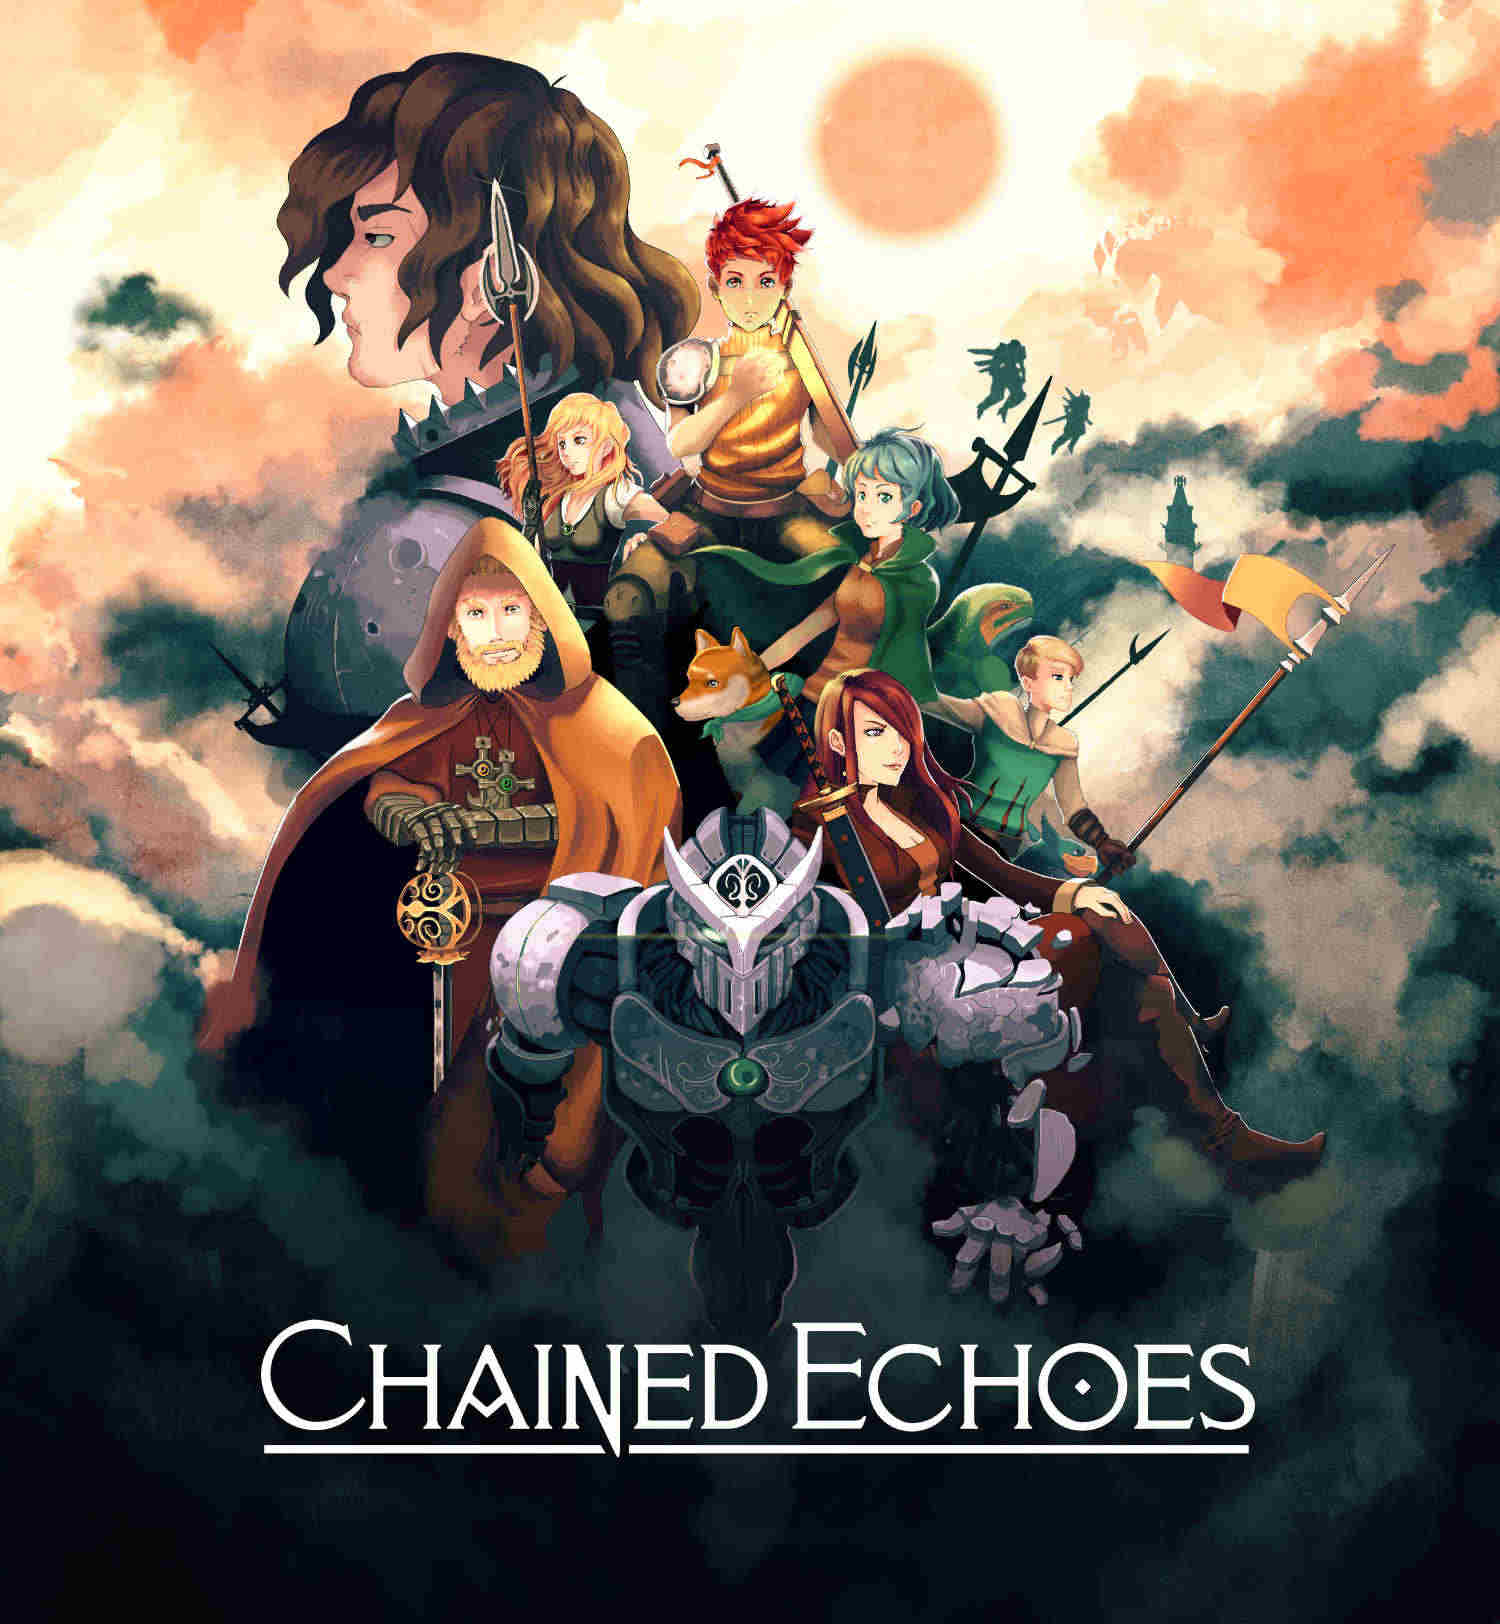 Chained echoes. : r/EmulationOnAndroid